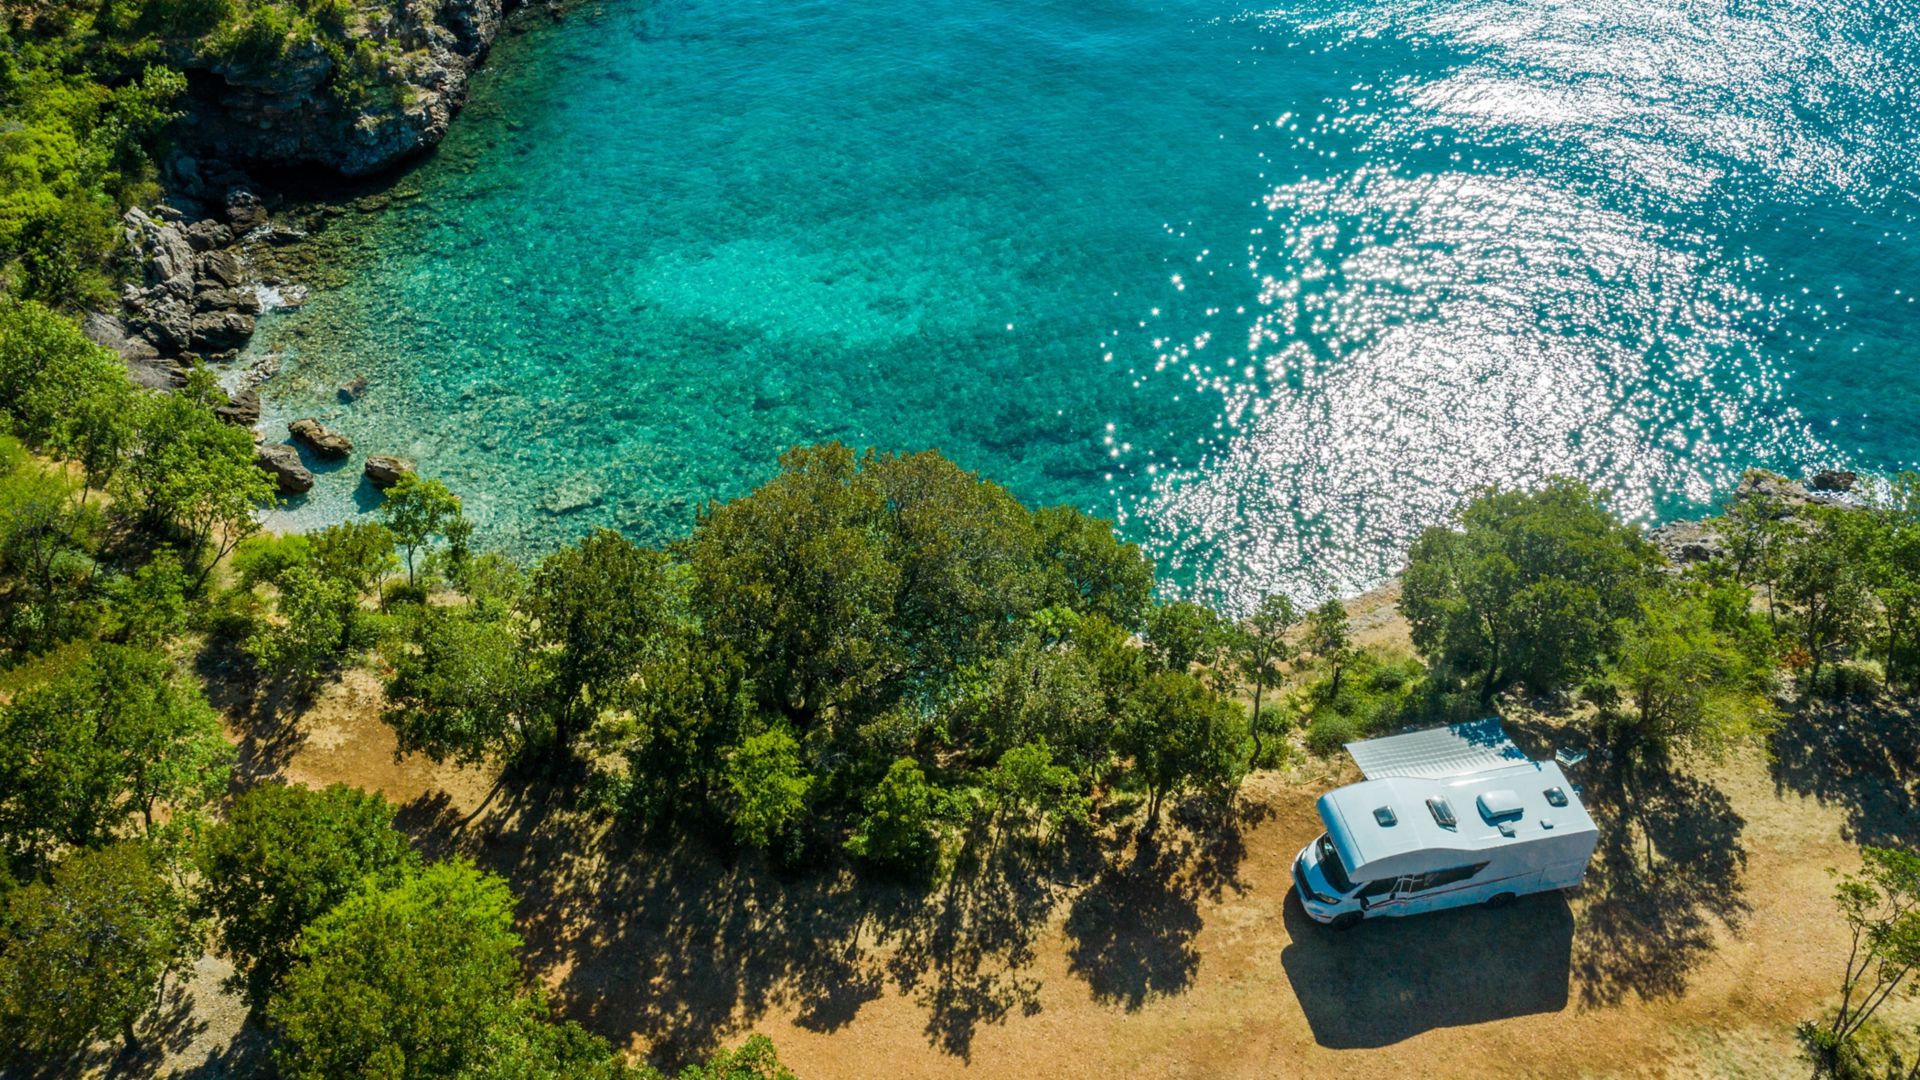 Aerial Photo of Scenic Sea Front RV Campsite. Modern Motorhome Camper Van on the Mediterranean Sea Croatian Coast. Vacation on the Road. Turquoise Bay.